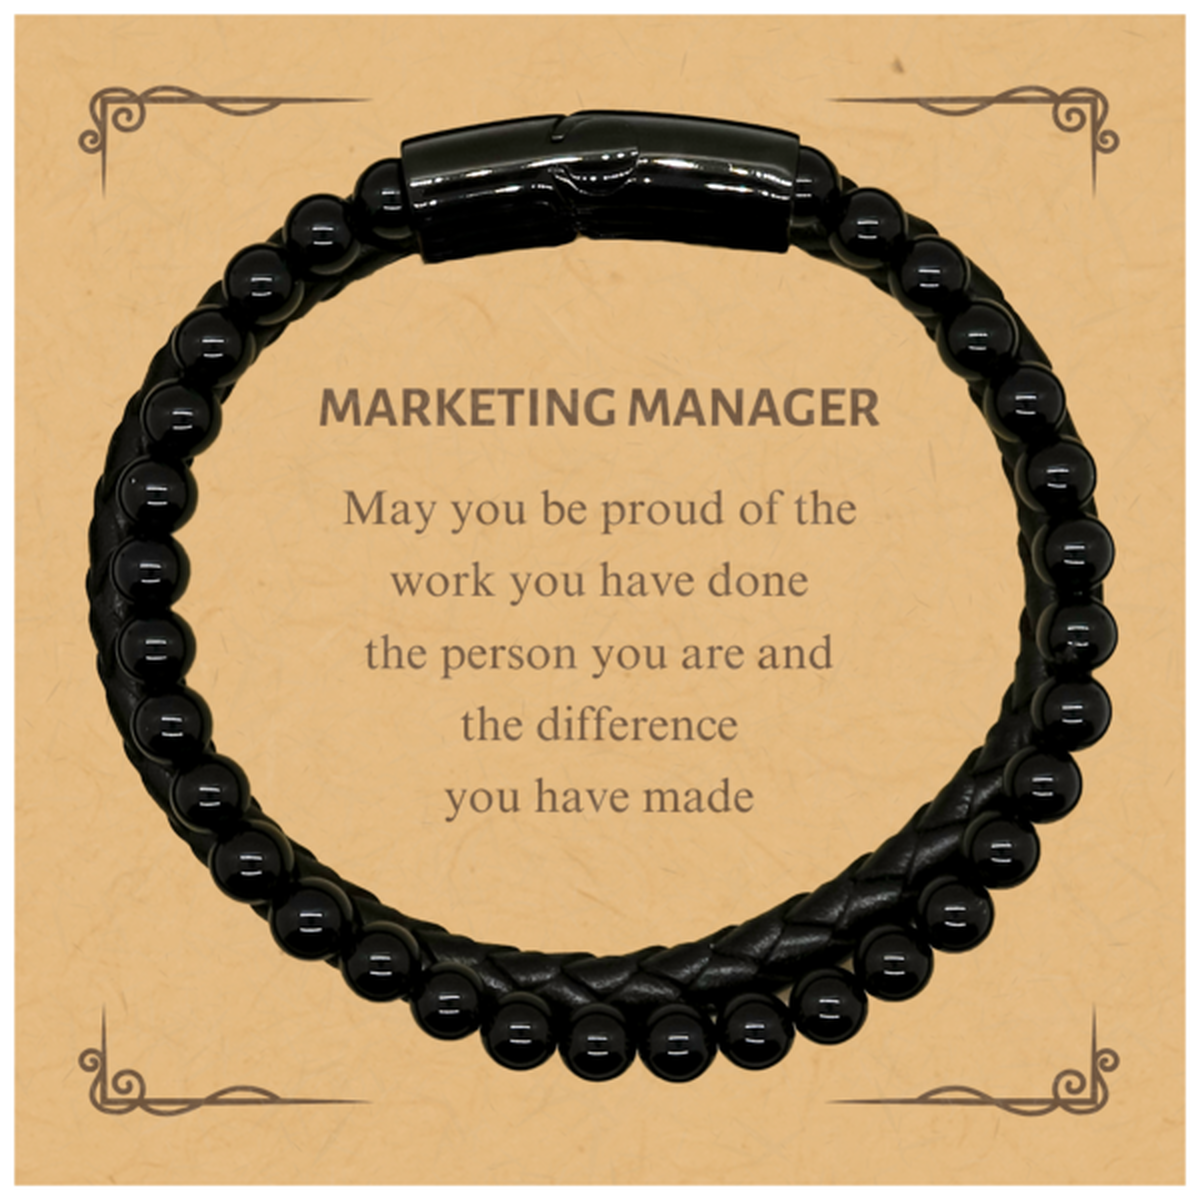 Marketing Manager May you be proud of the work you have done, Retirement Marketing Manager Stone Leather Bracelets for Colleague Appreciation Gifts Amazing for Marketing Manager